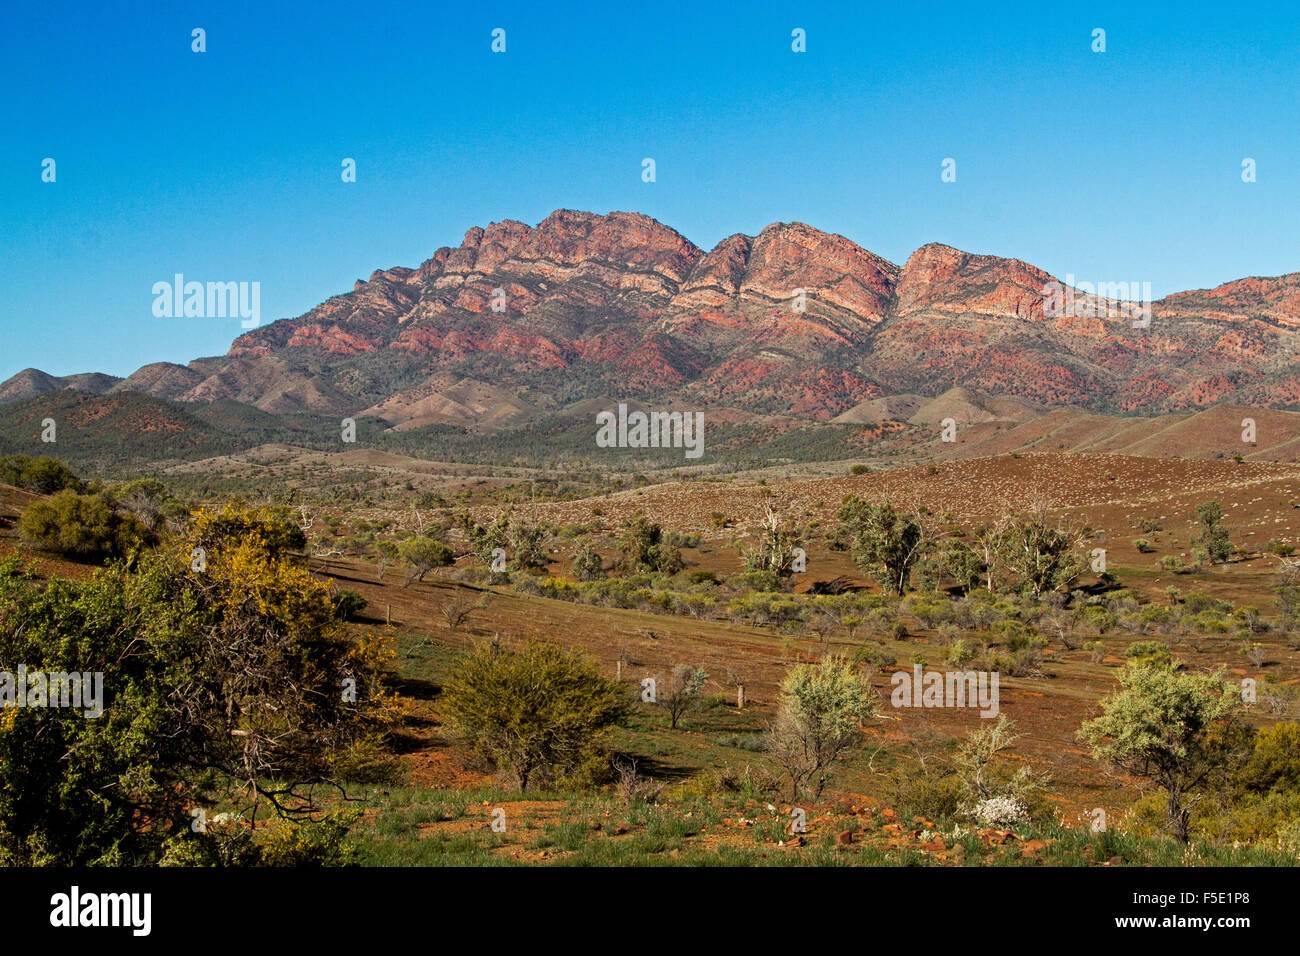 Stunning landscape with red rocky peaks & wide valley under blue sky in Flinders Ranges National Park, outback South Australia Stock Photo